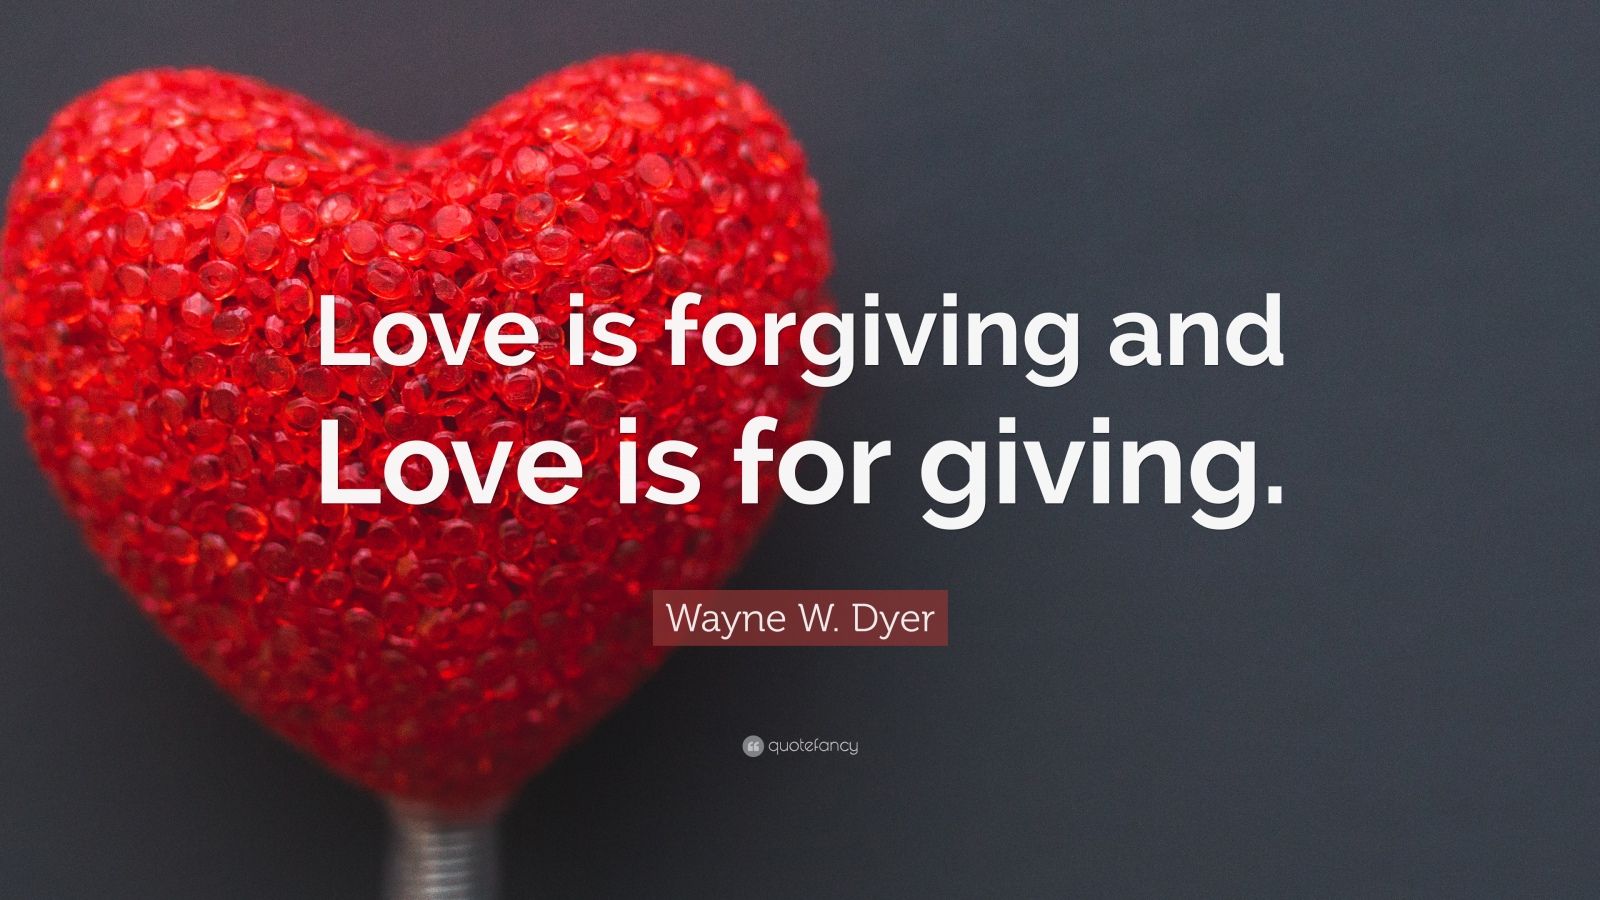 essay writing on love is giving and forgiving